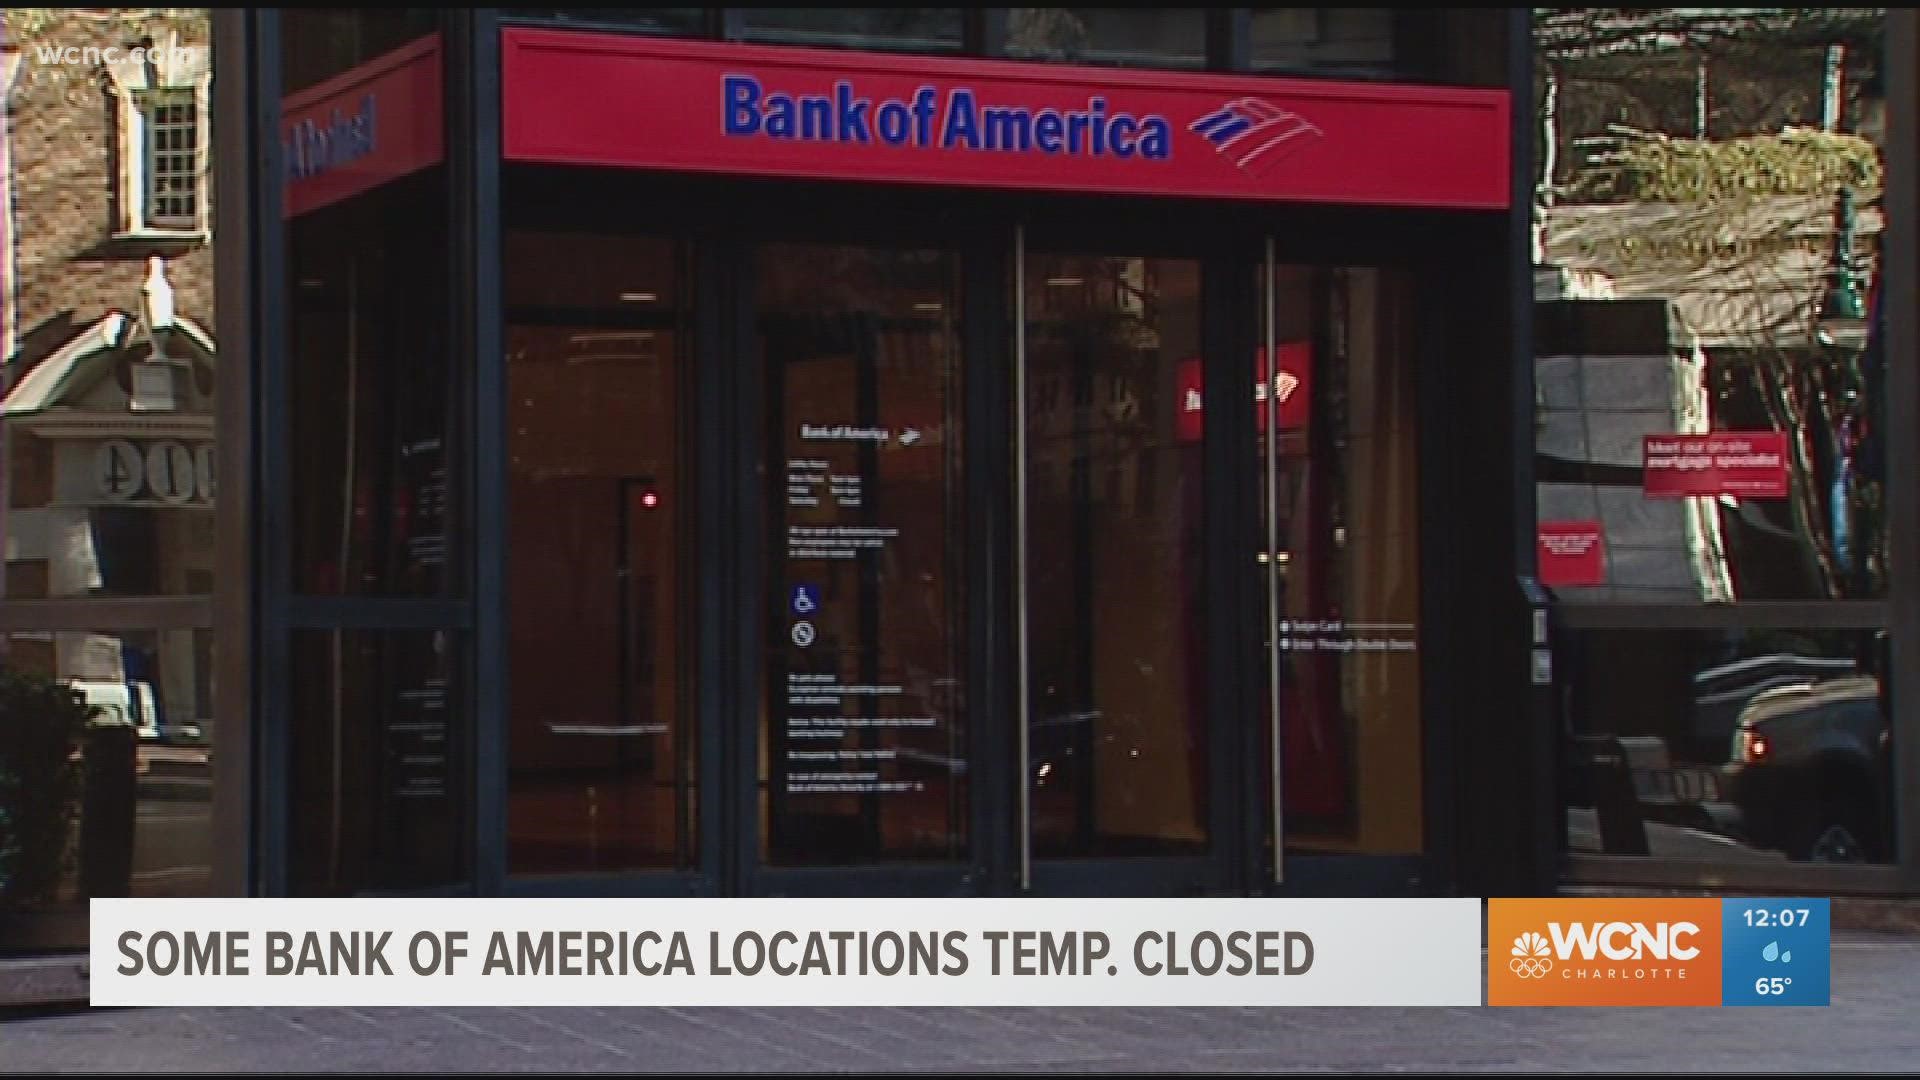 Multiple Bank of America branches in the Charlotte area are closed for a variety of reasons, bank officials said this week.